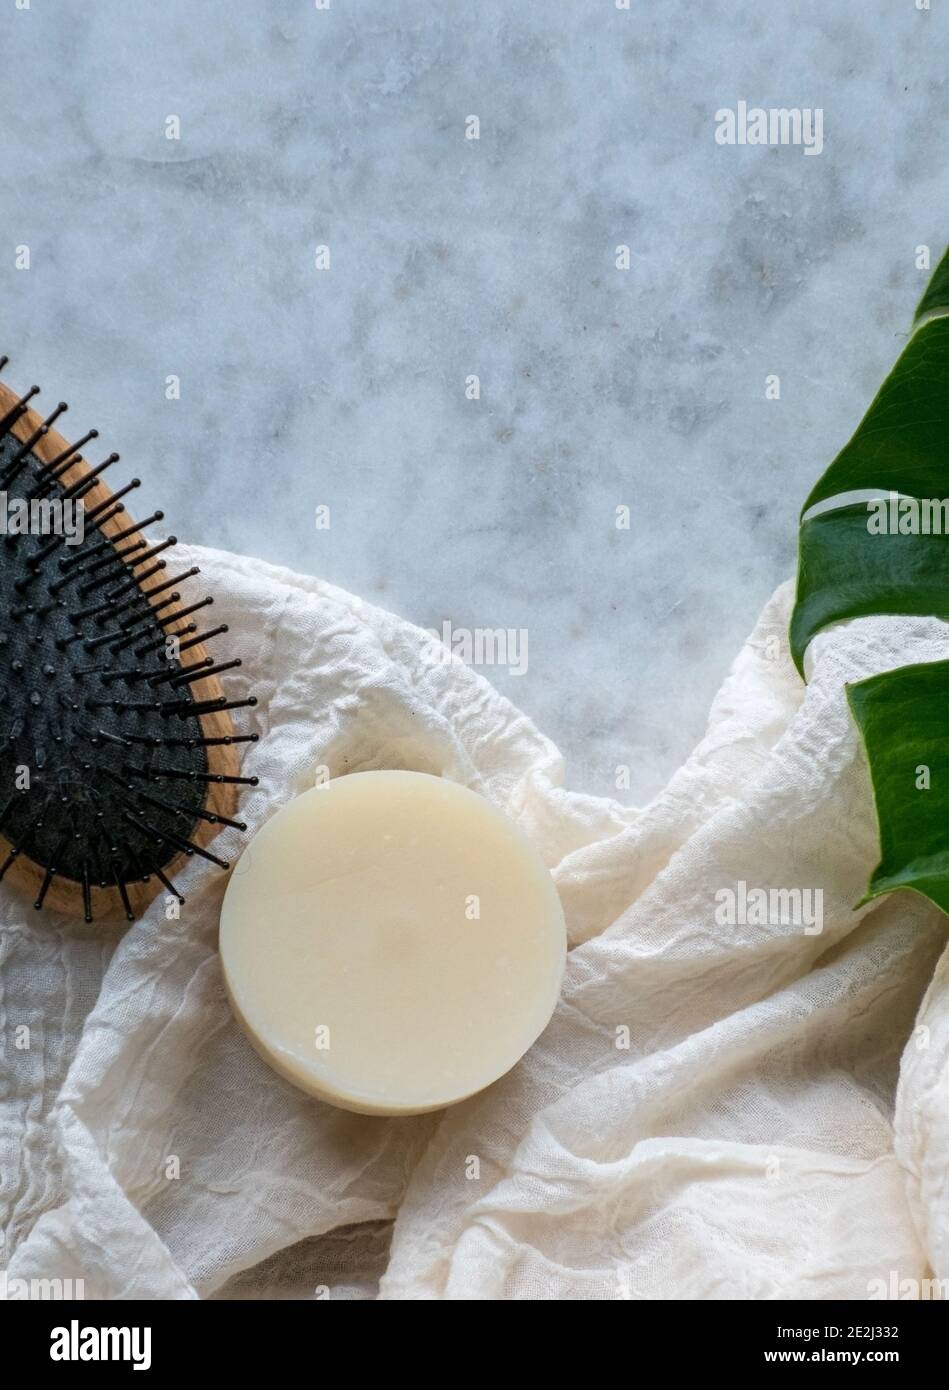 Solid Shampoo bar with Argan Oil isolated on a marble board and a hair brush Stock Photo